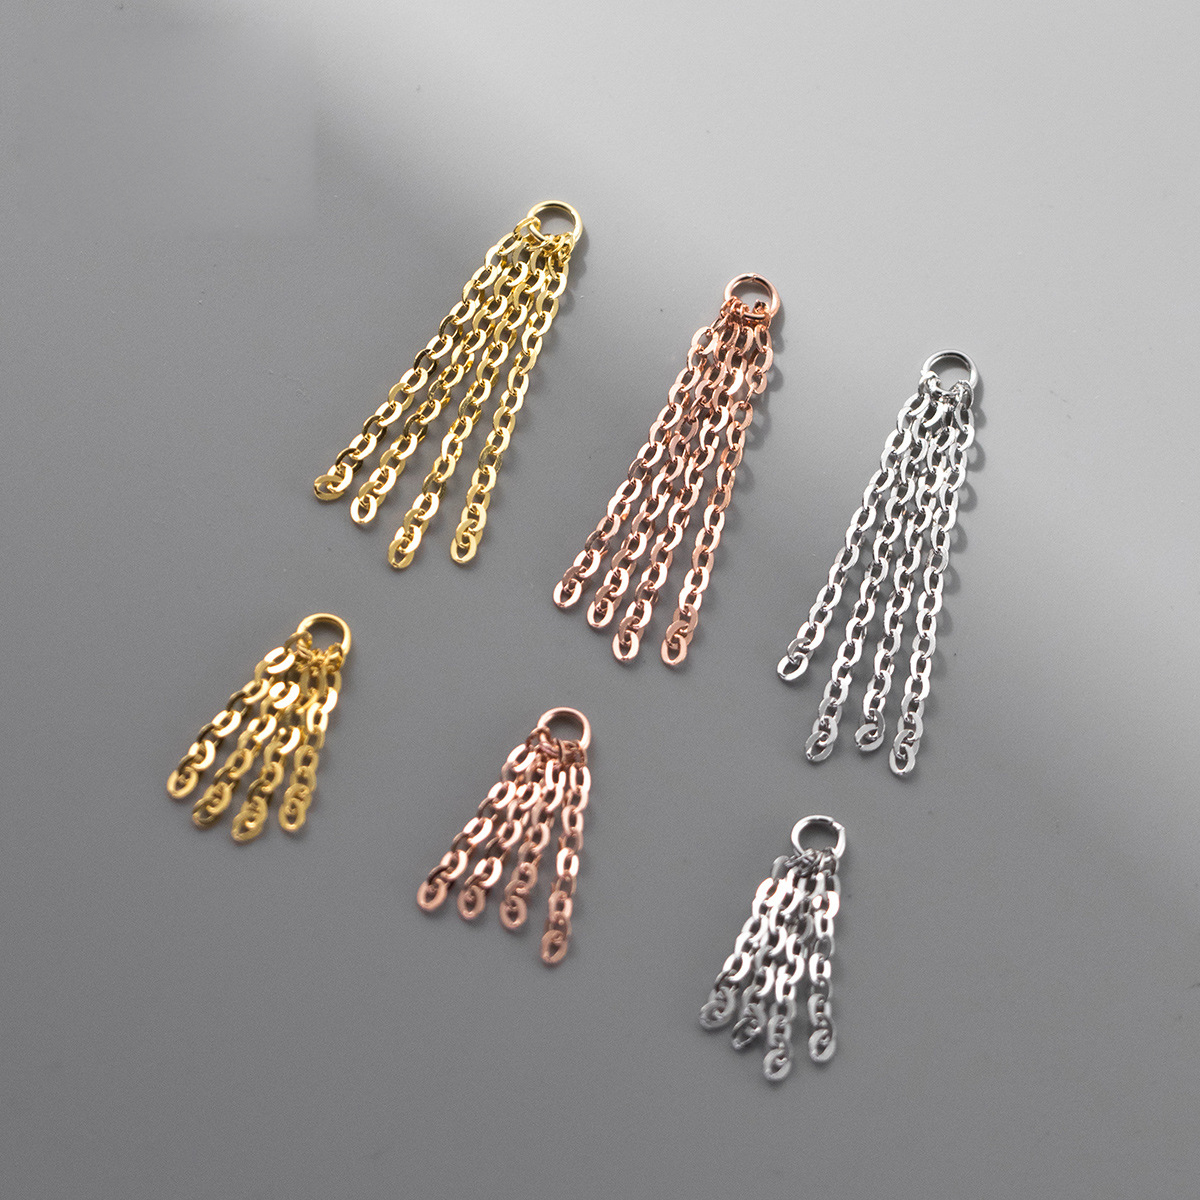 Electroplated gold length 25 mm